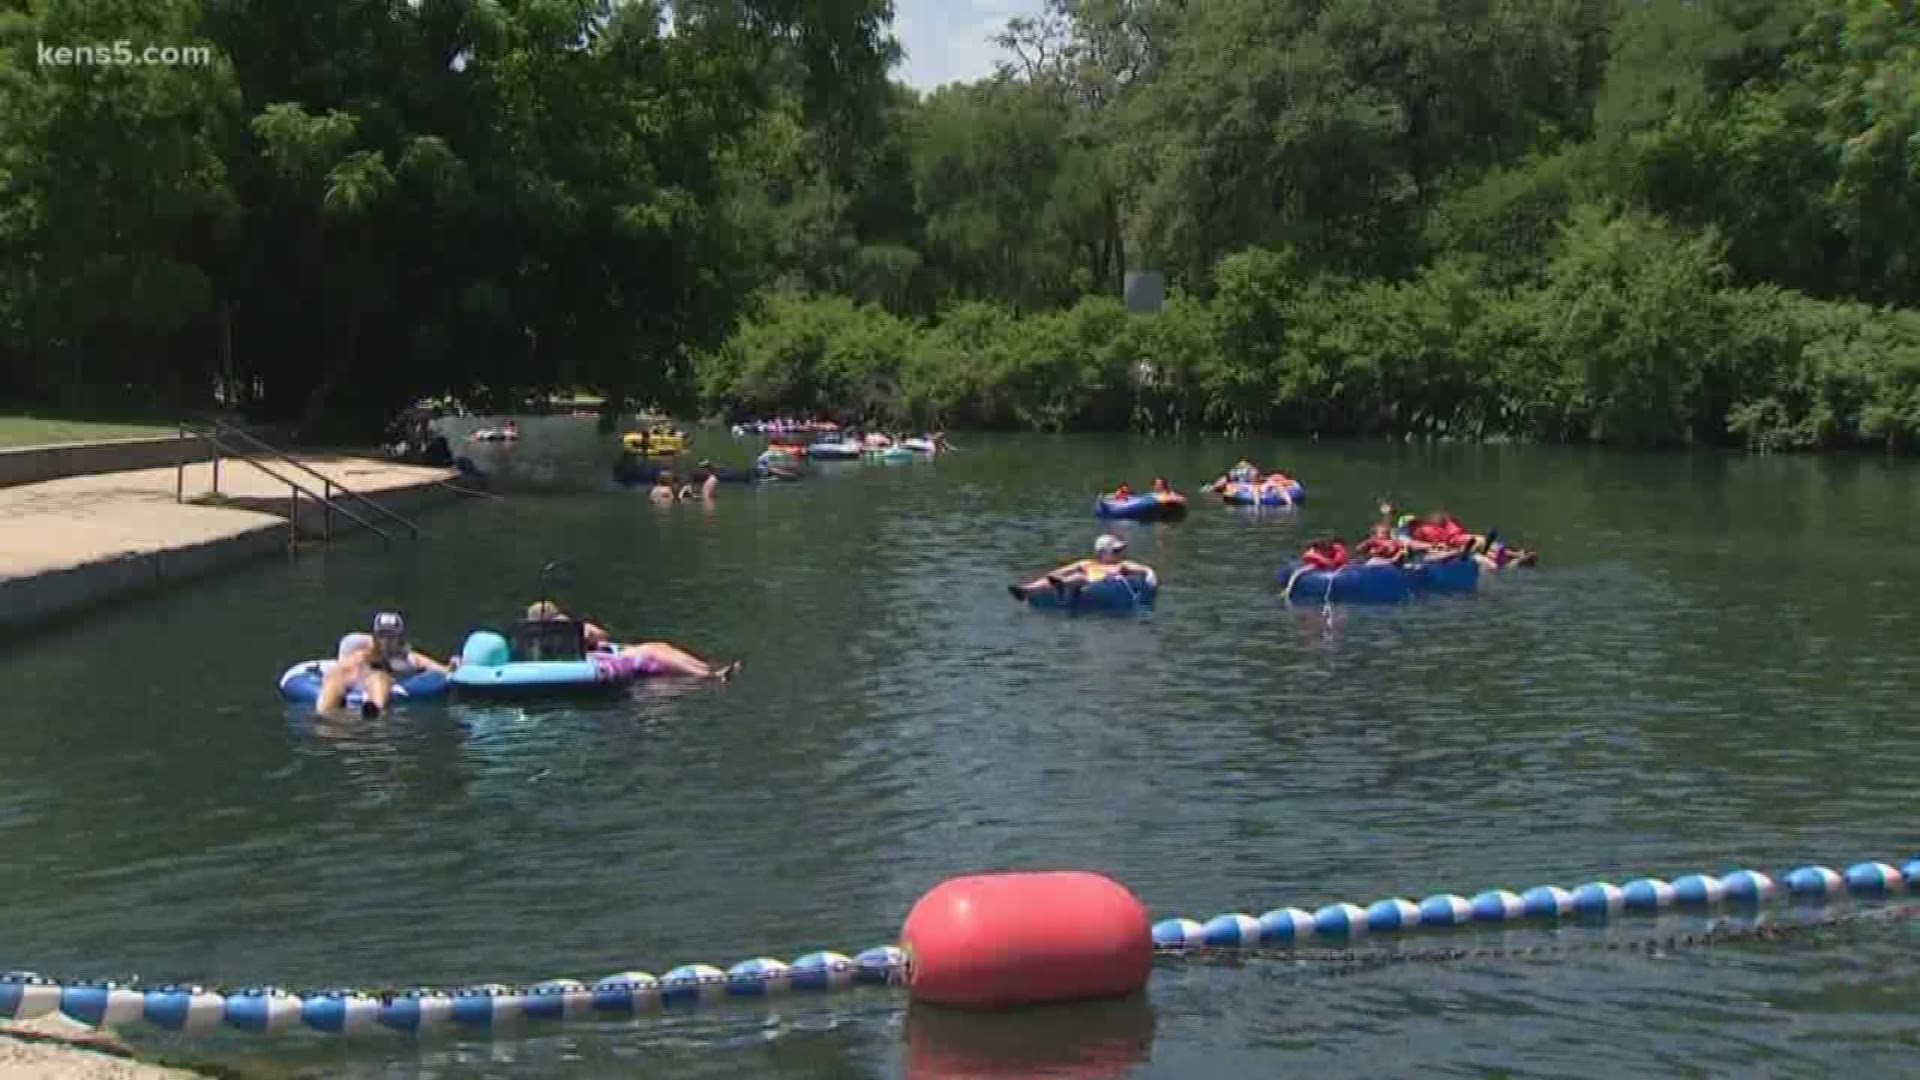 KENS 5 photojournalist Ivan Gibson gives us a splash of what to expect in New Braunfels this weekend as tubers look to float over the holidays.